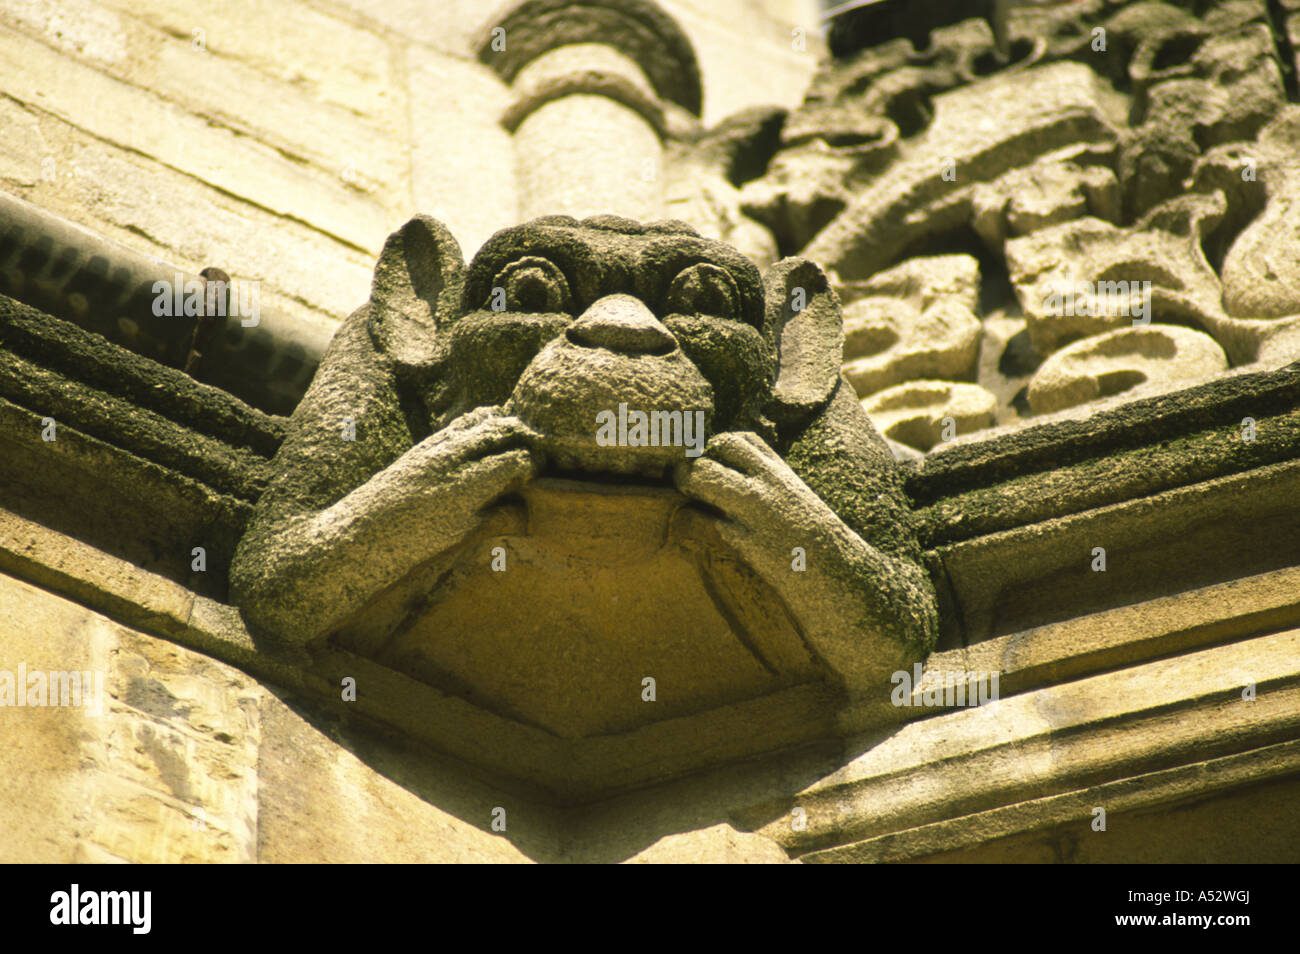 Oxford, UK : Nov 01 2003: Grotesque Carving of a Cheeky Monkey Pulling Faces on 1 Nov 03 at Magdalen College, Oxford University Stock Photo